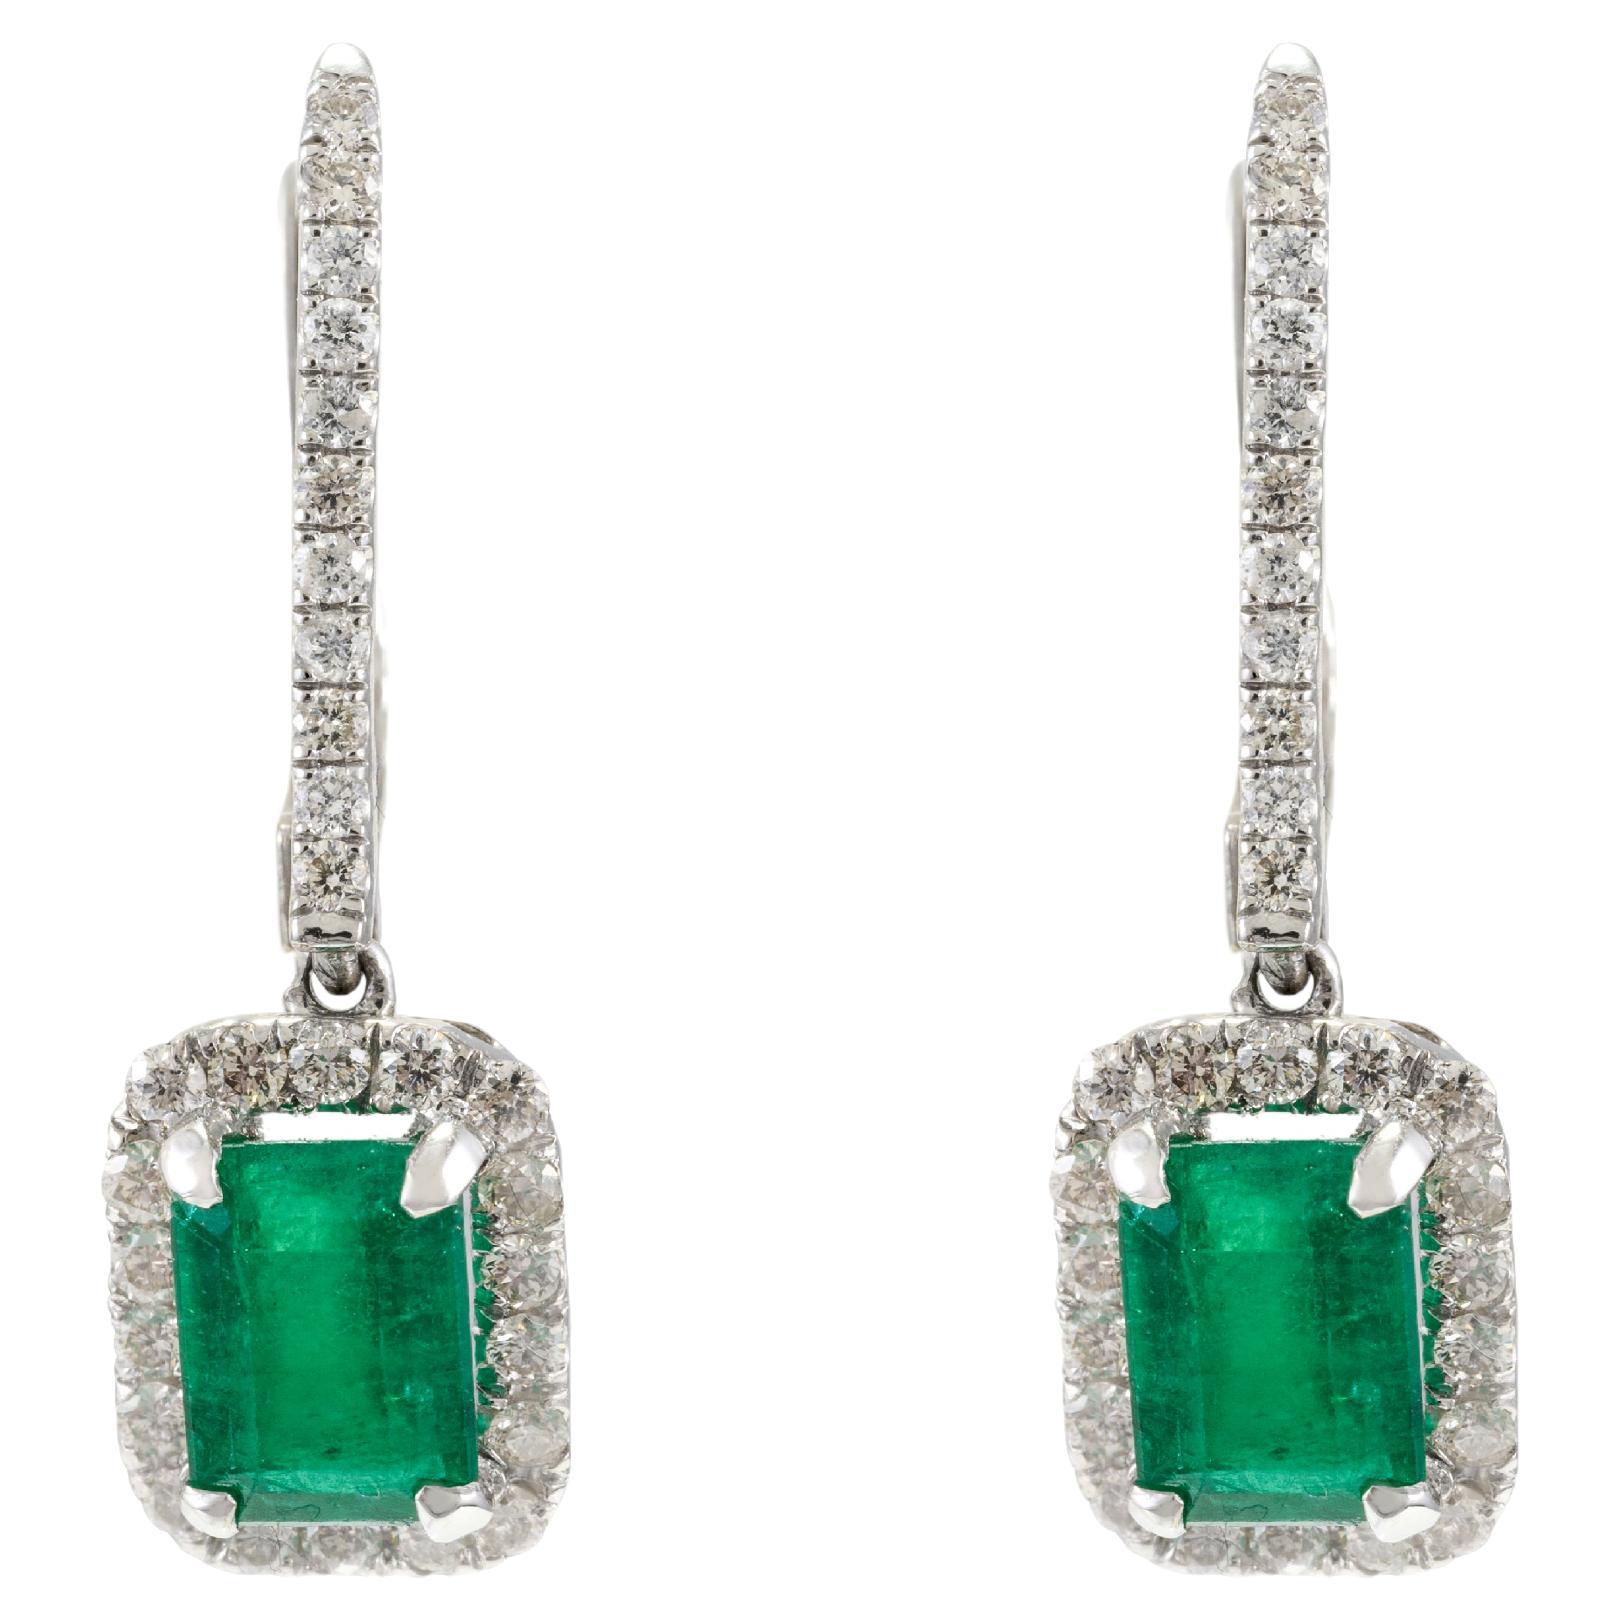 Certified 2.18 Carat Green Emerald and Diamond Earrings 18k Solid White Gold